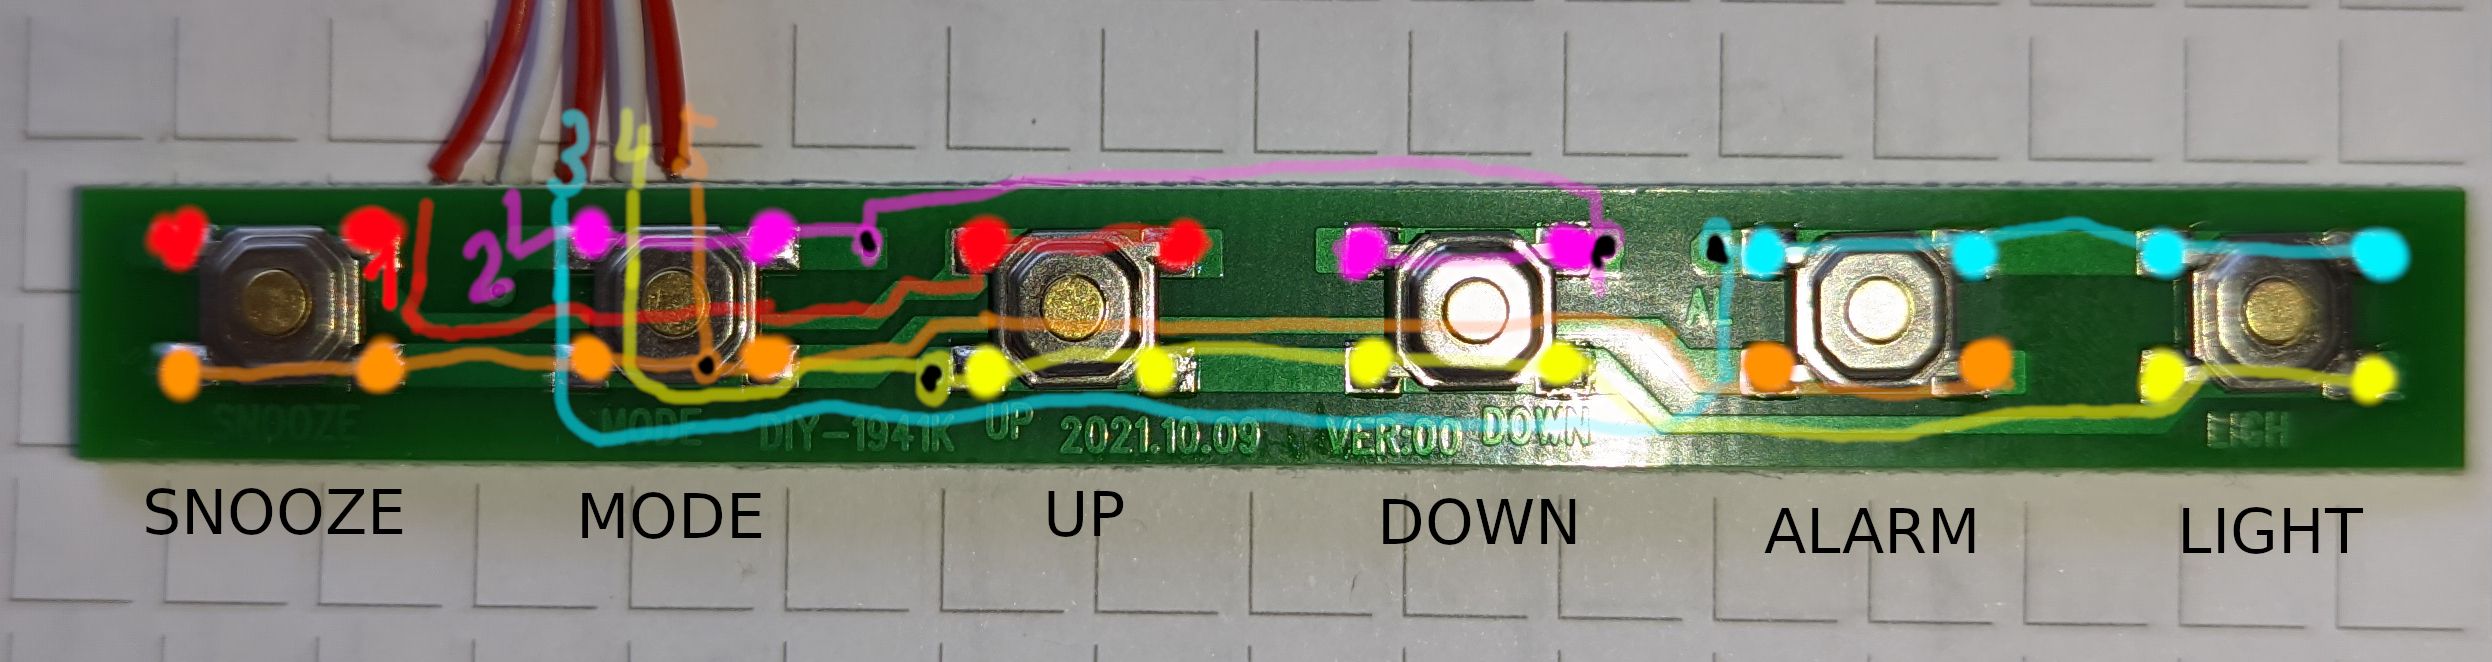 An elongated green PCB with 6 buttons on it